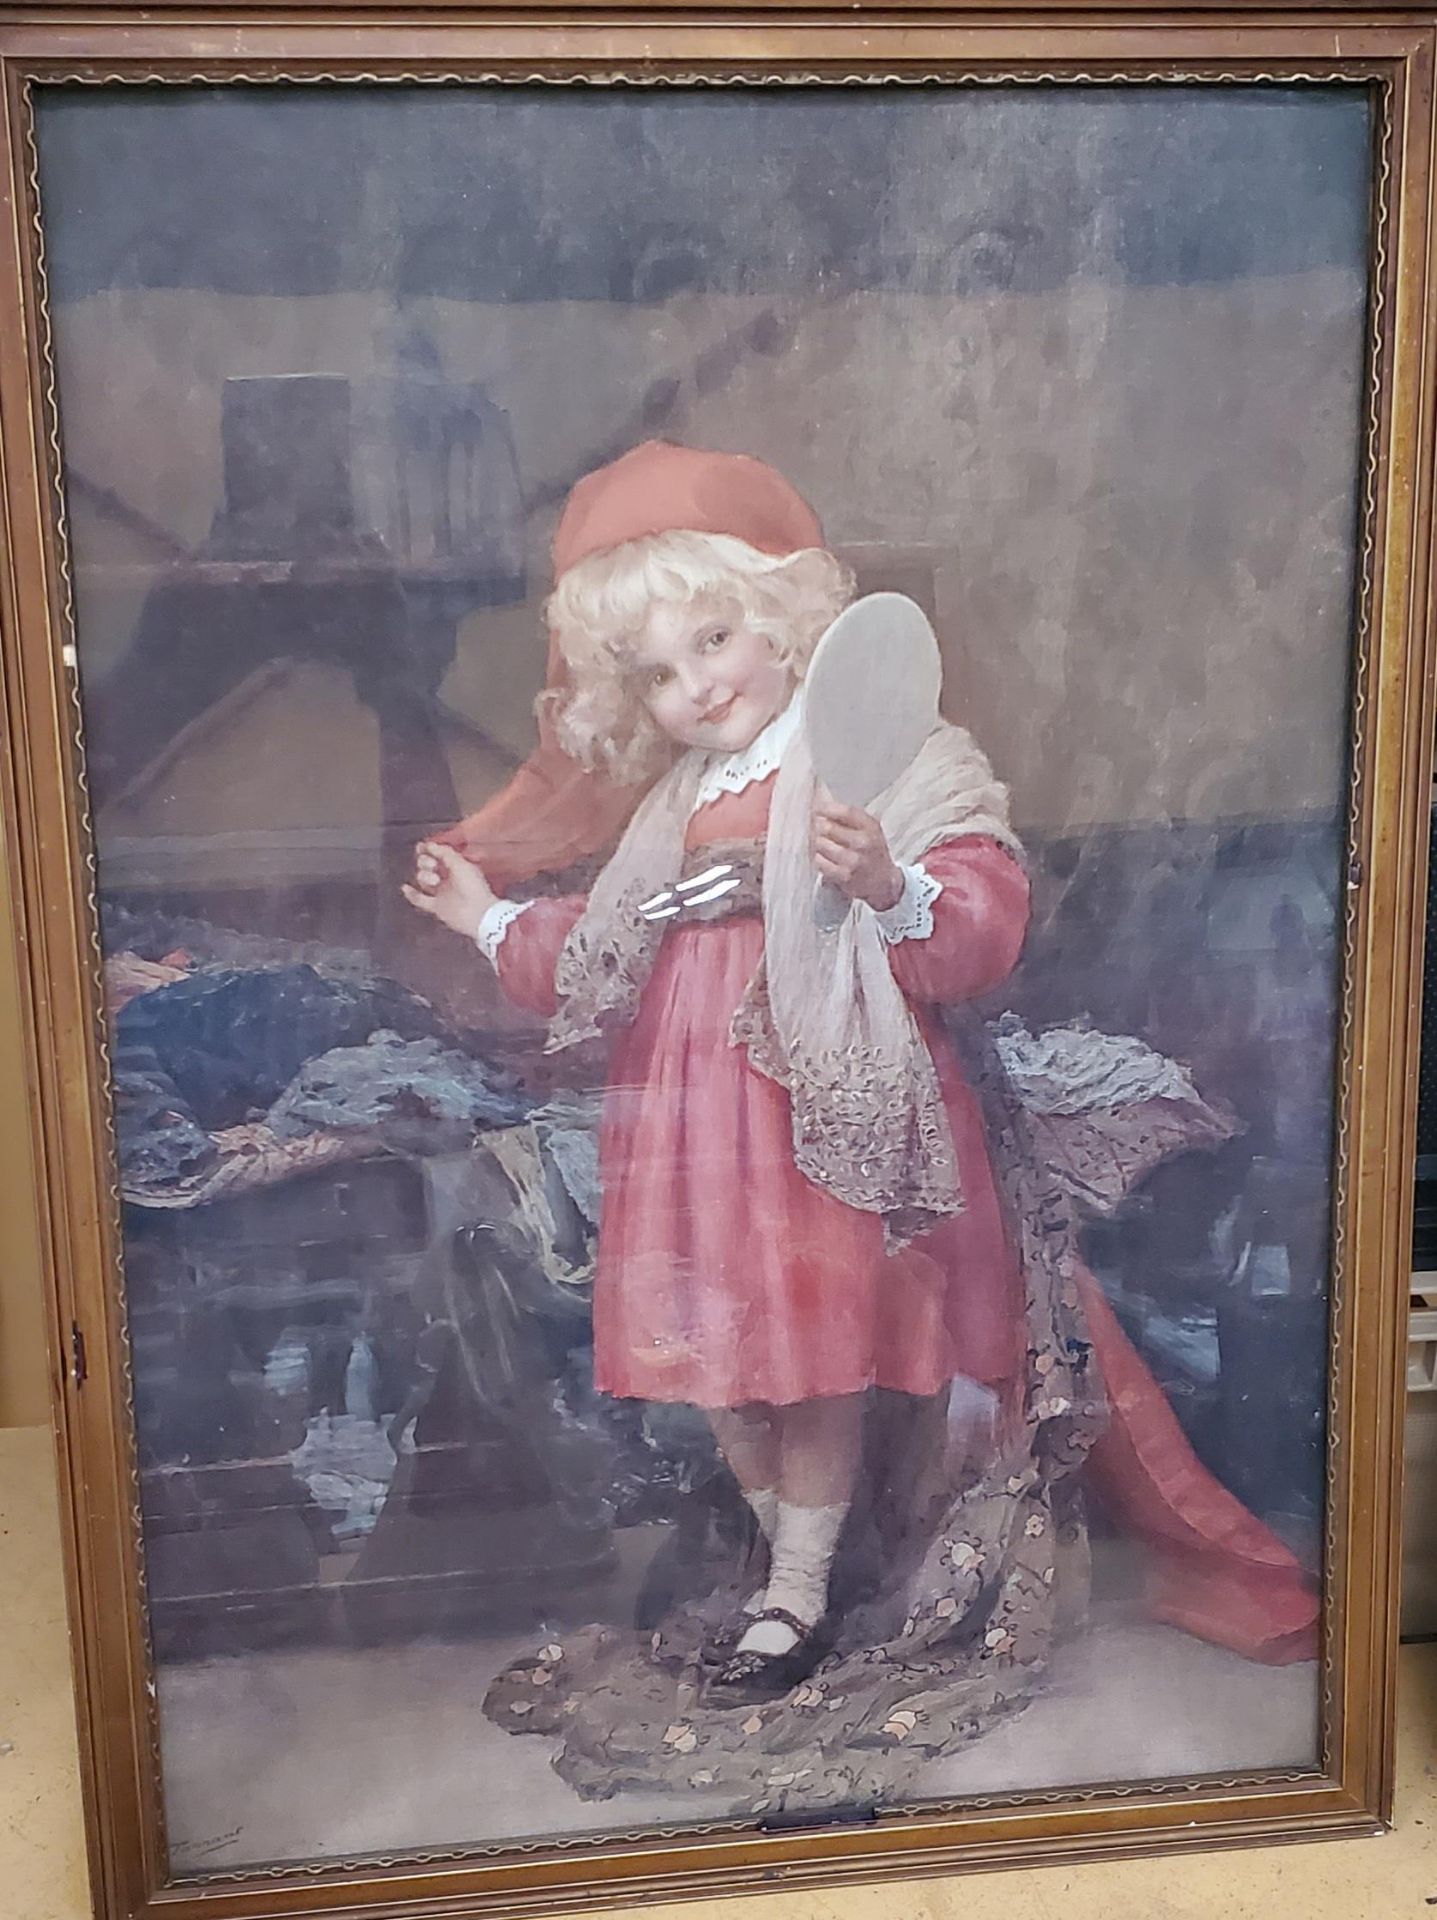 A PERCY TARRANT FRAMED EDWARDIAN PRINT OF A GIRL IN RED HOLDING A MIRROR